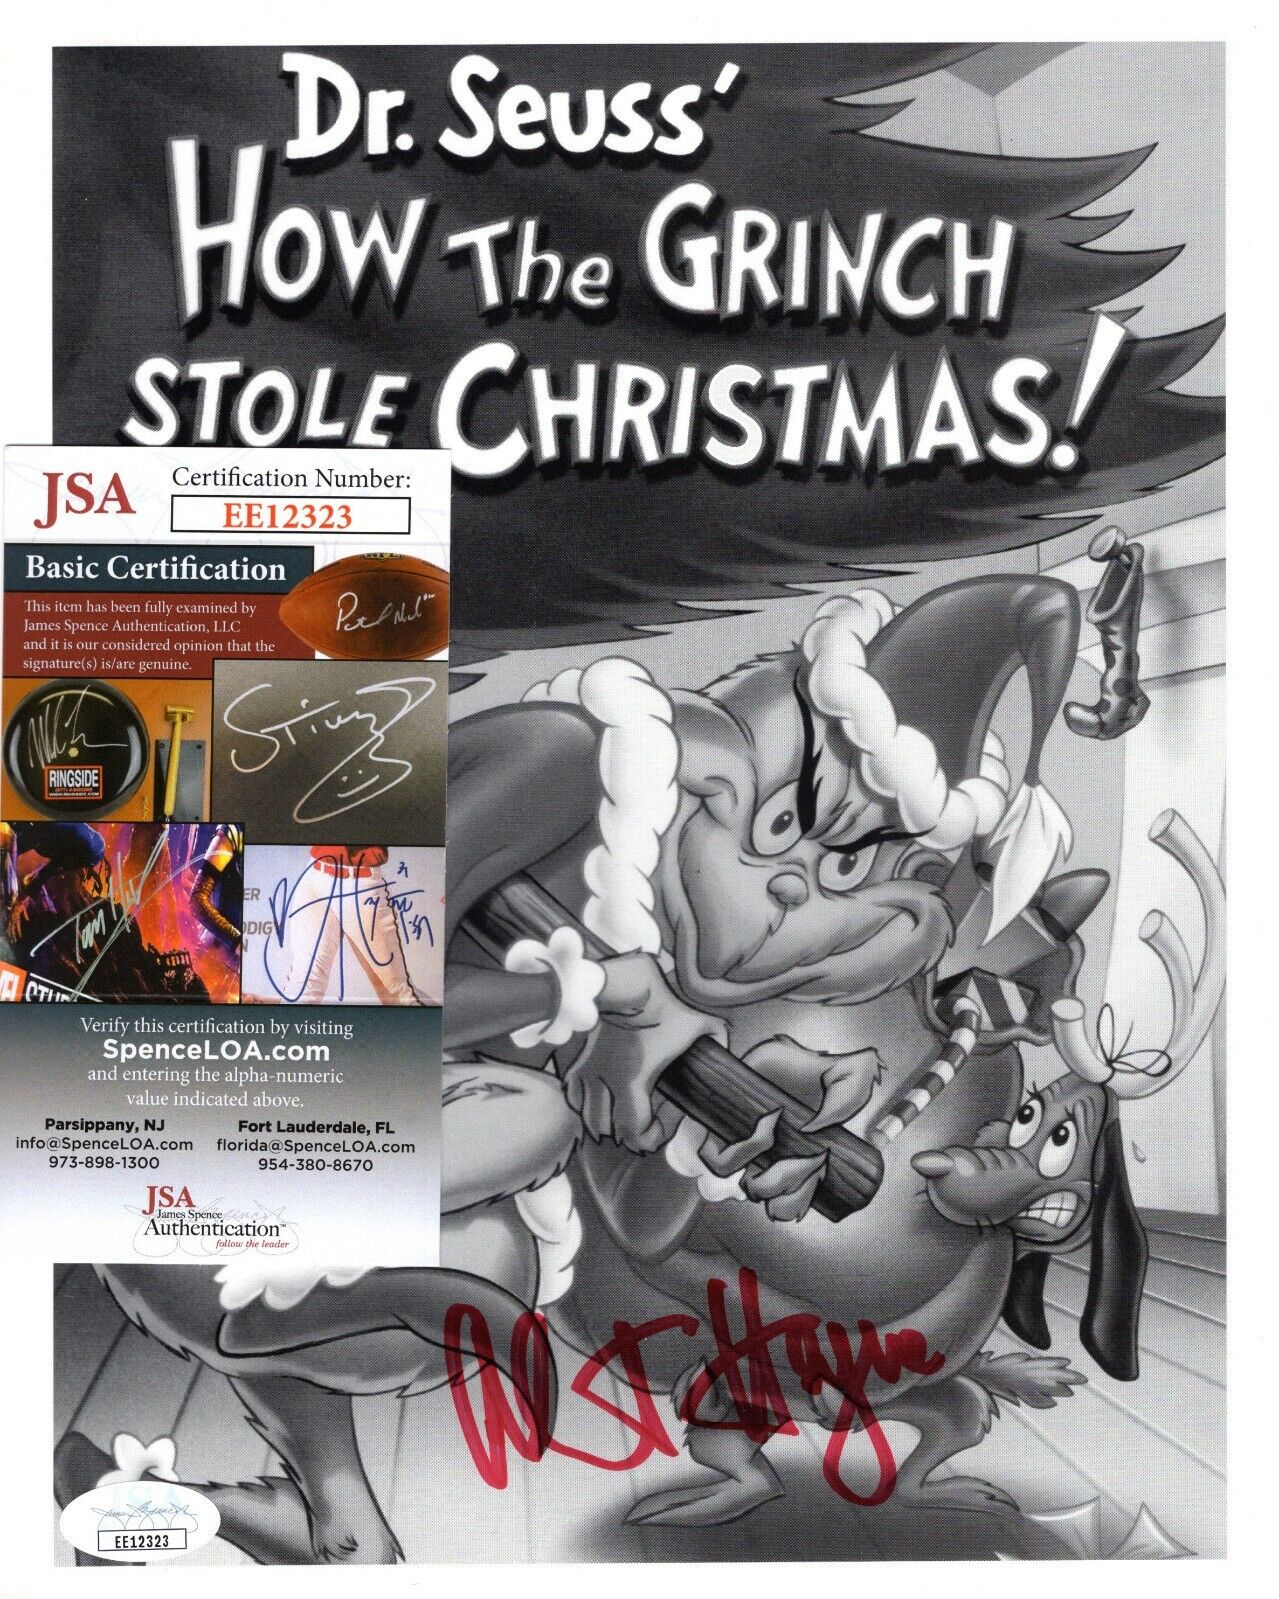 Albert Hague Hand Signed Dr. Seuss How The Grinch Stole Christmas 8x10 Photo Poster painting JSA